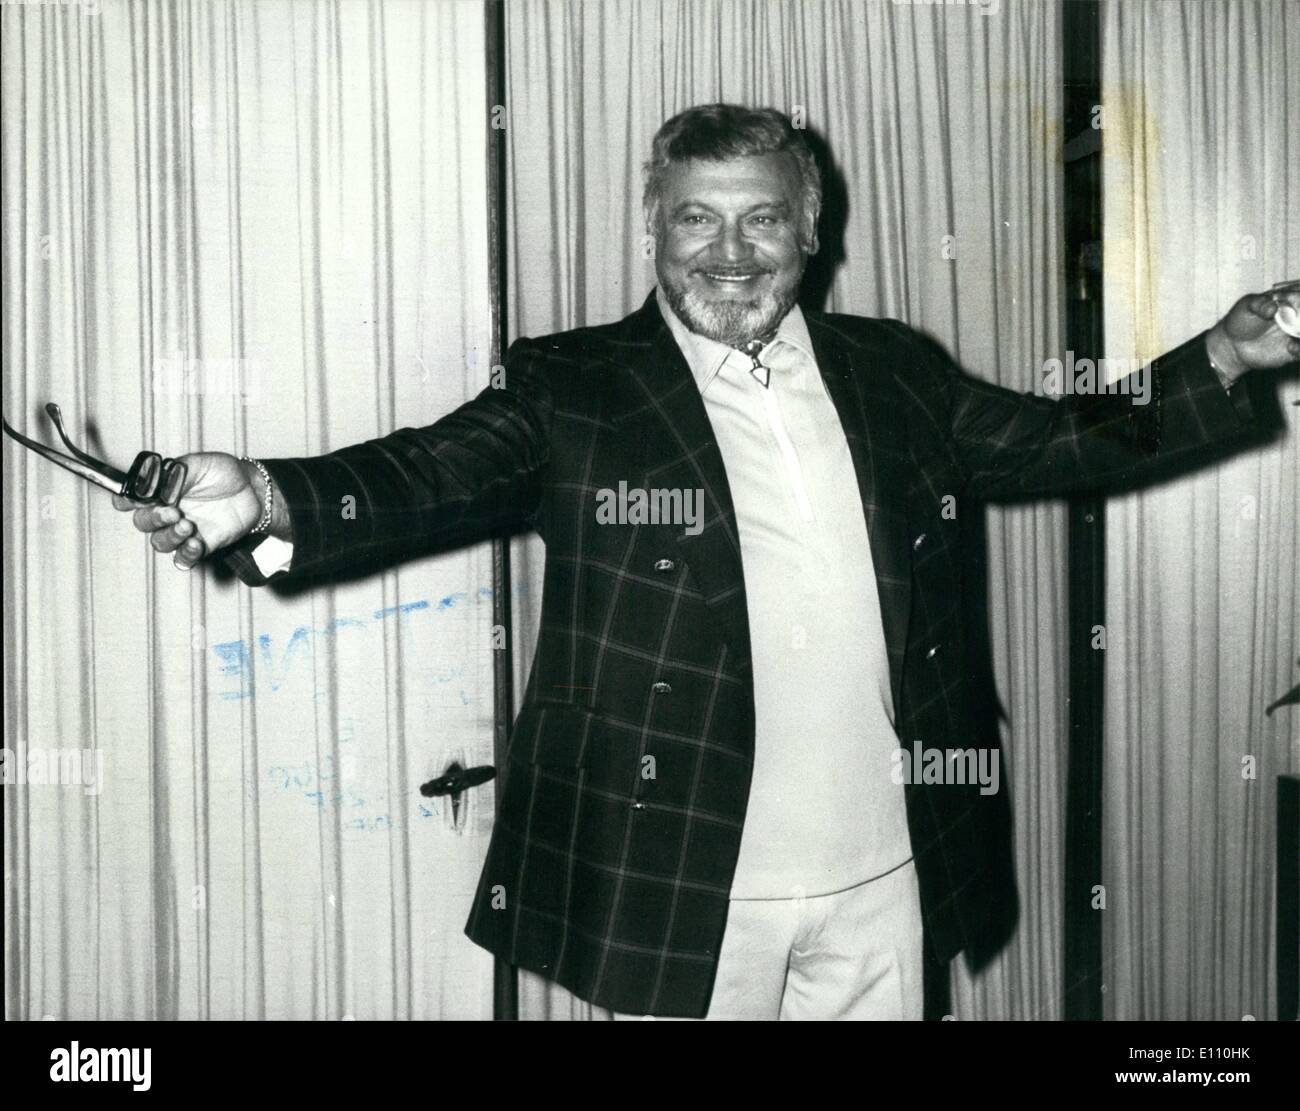 Nov. 11, 1974 - Frankie Lane In London: American Singer Frankie Laine has arrived in London to undertake a British tour, which will include two concerts in London. Photo Shows Frankie Laine pictured at a reception in London today. Stock Photo